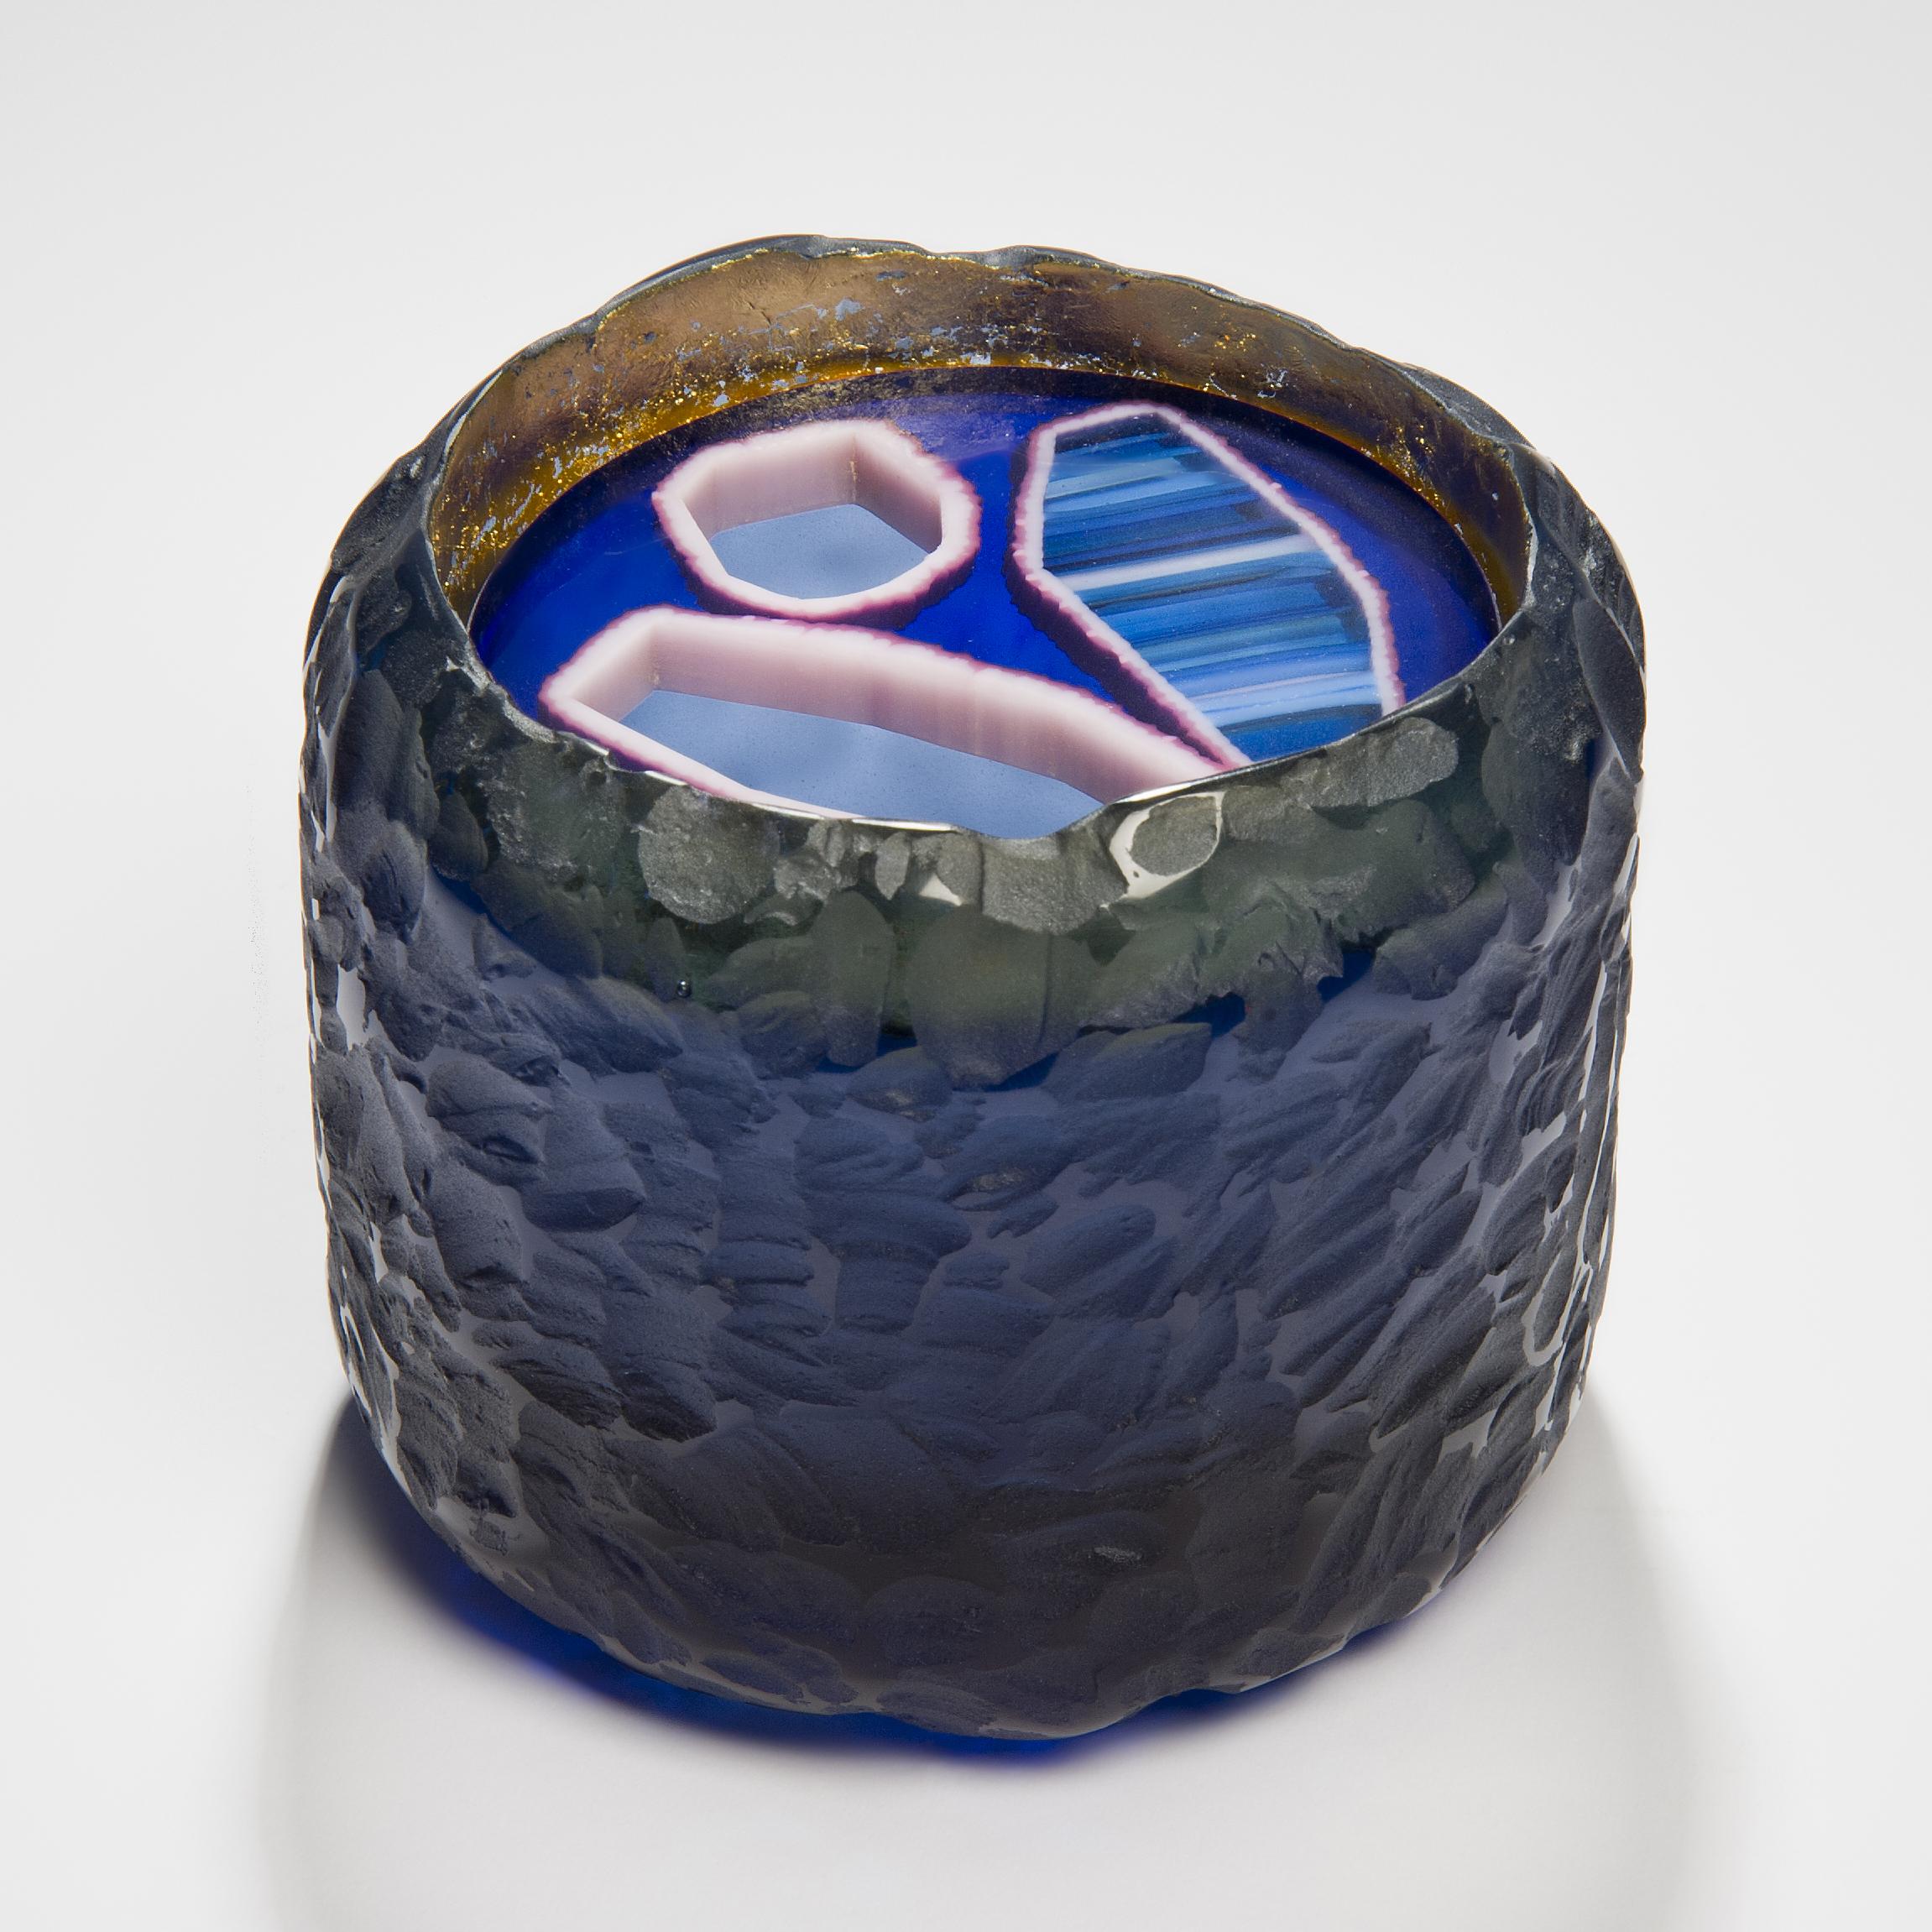 Topaz Murini Agate Jar is a unique blue, purple and pink sculptural / jar artwork created from cast glass by the British artist Angela Jarman. Using the lost wax technique, the base is cast blue lead crystal. The top disc insert is created from